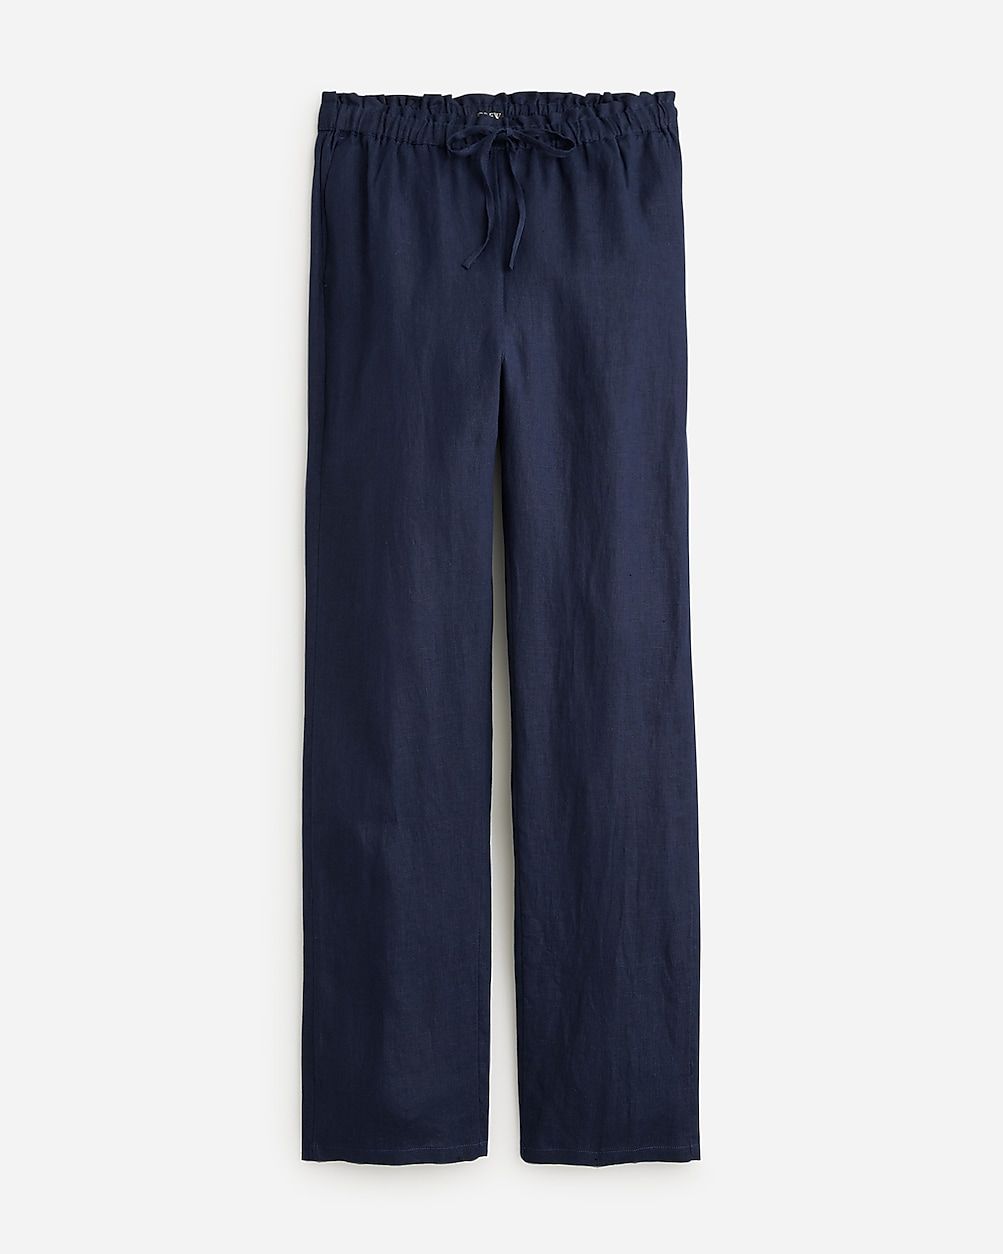 Your browser does not support videoShop this looknew color4.4(225 REVIEWS)Soleil pant in linen$98... | J.Crew US